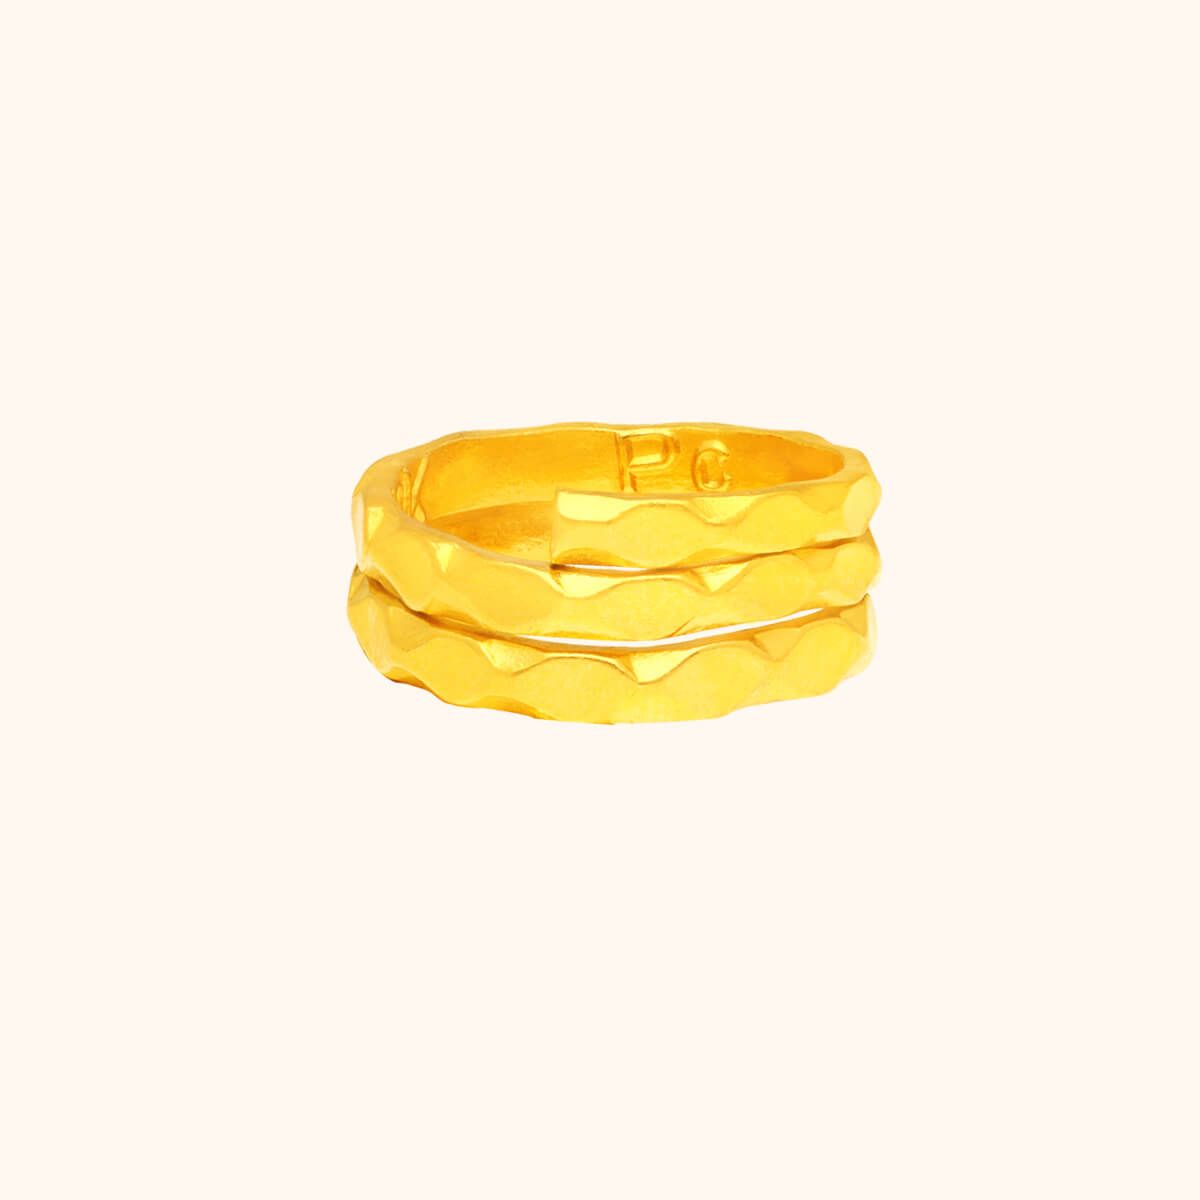 Buy MJ Jewellery MJ Jewellery THE Mix Collection 999.9/24K Pure Gold Pixiu  Agate Ring Set AGR-PX0.20G Online | ZALORA Malaysia